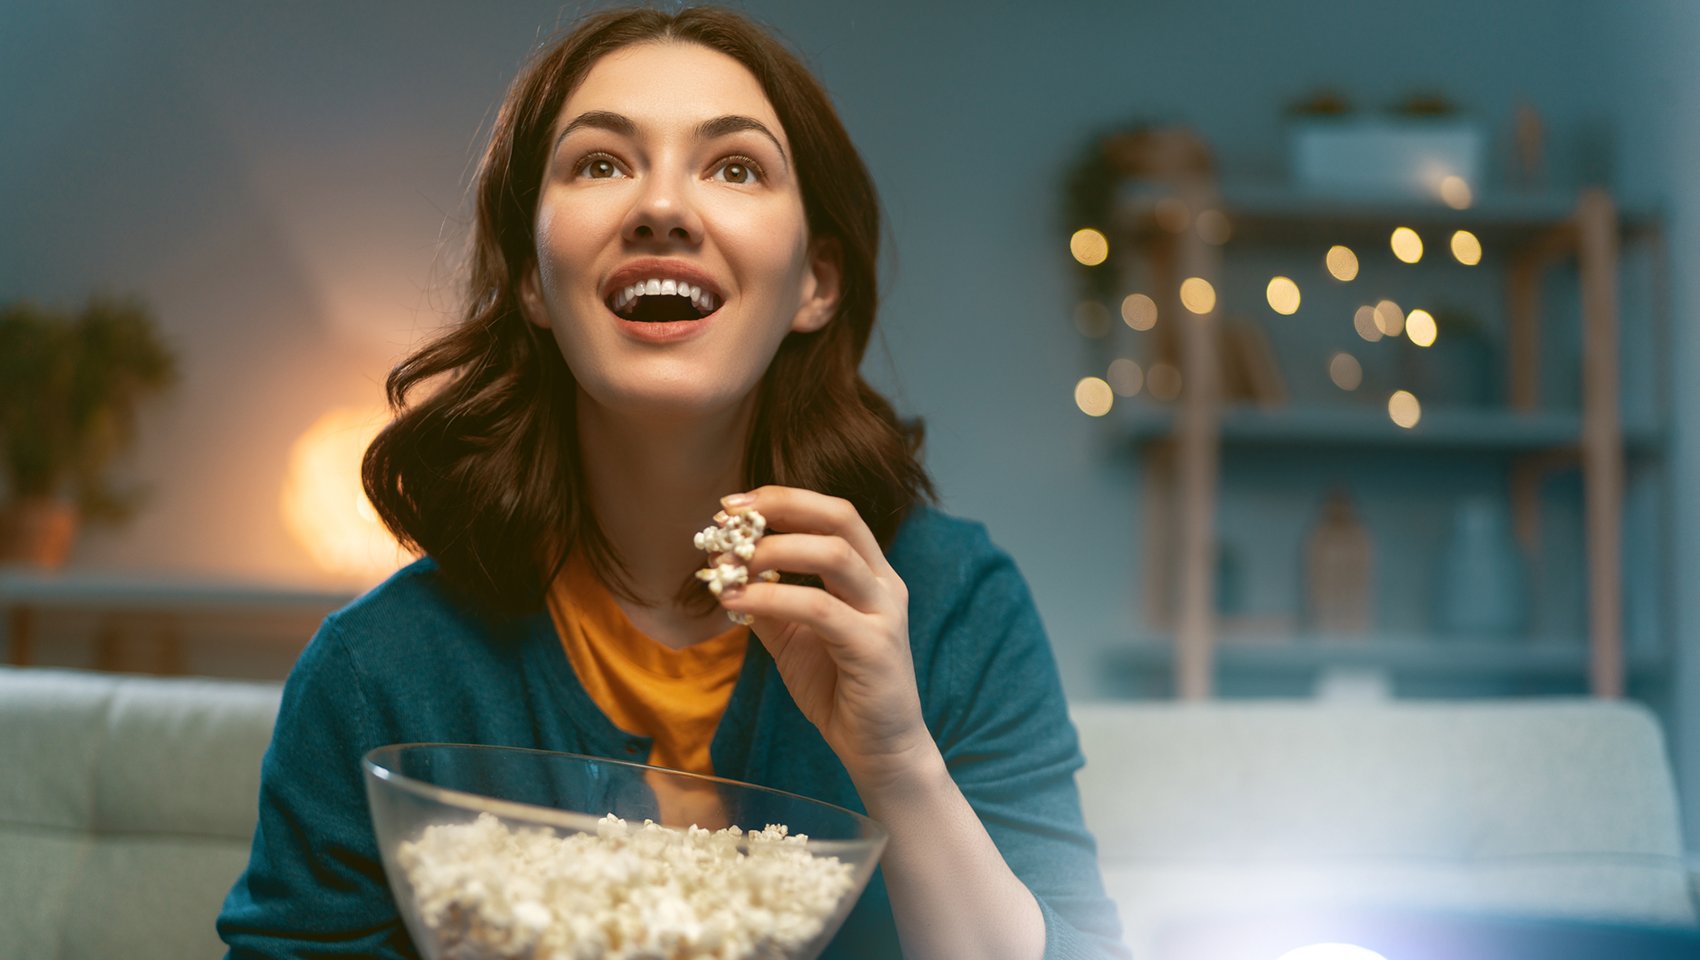 Woman watching a move and eating popcorn